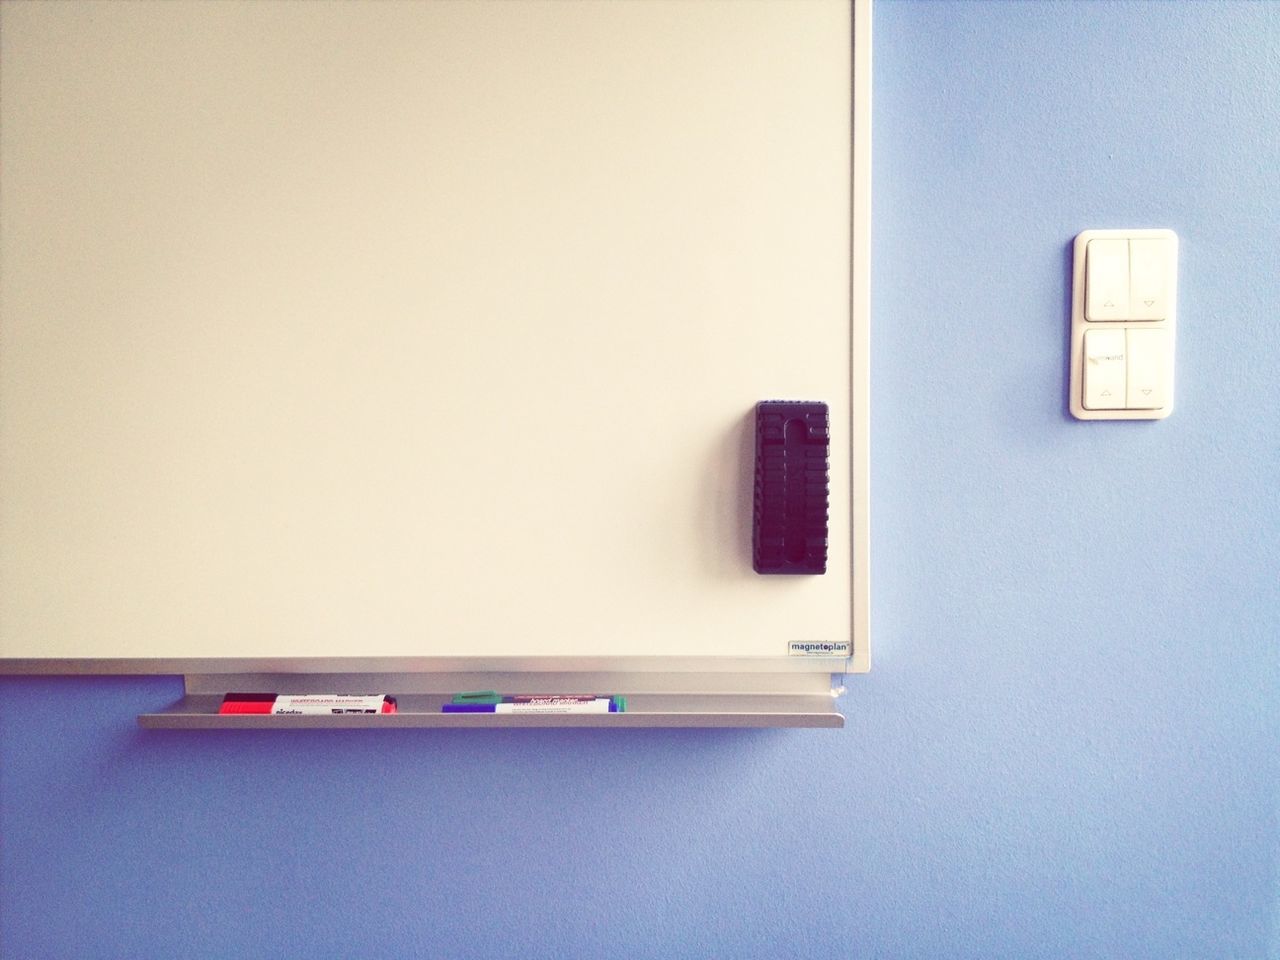 Close-up view of whiteboard